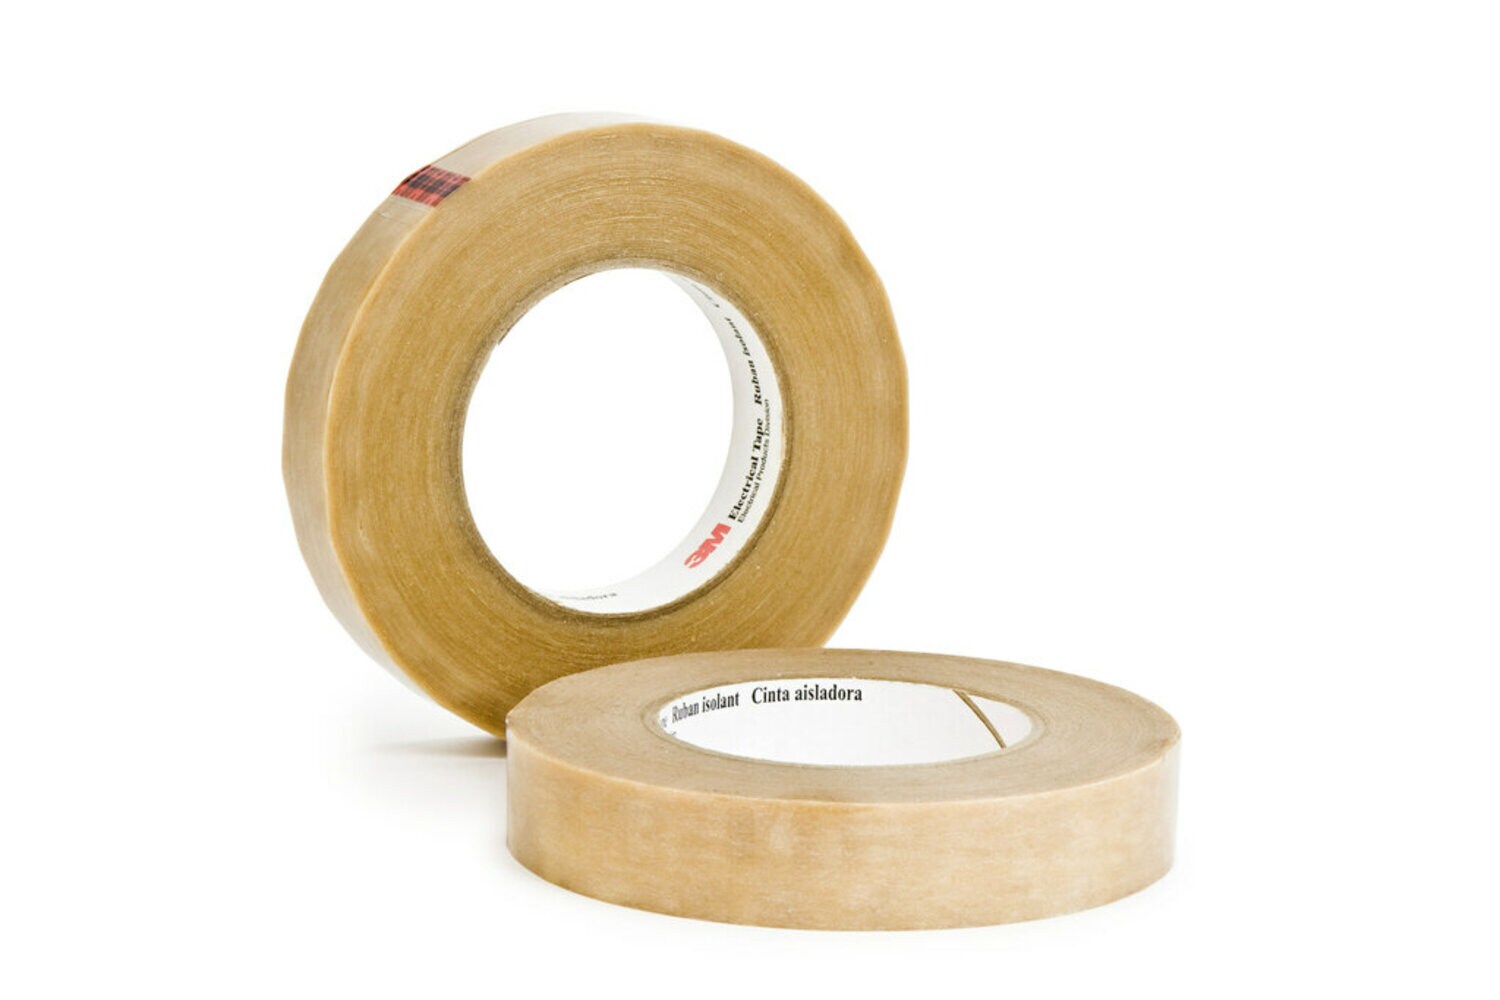 7010351318 - 3M Composite Film Electrical Tape 44HT, 1 in x 90 yd, 36 Rolls/Case